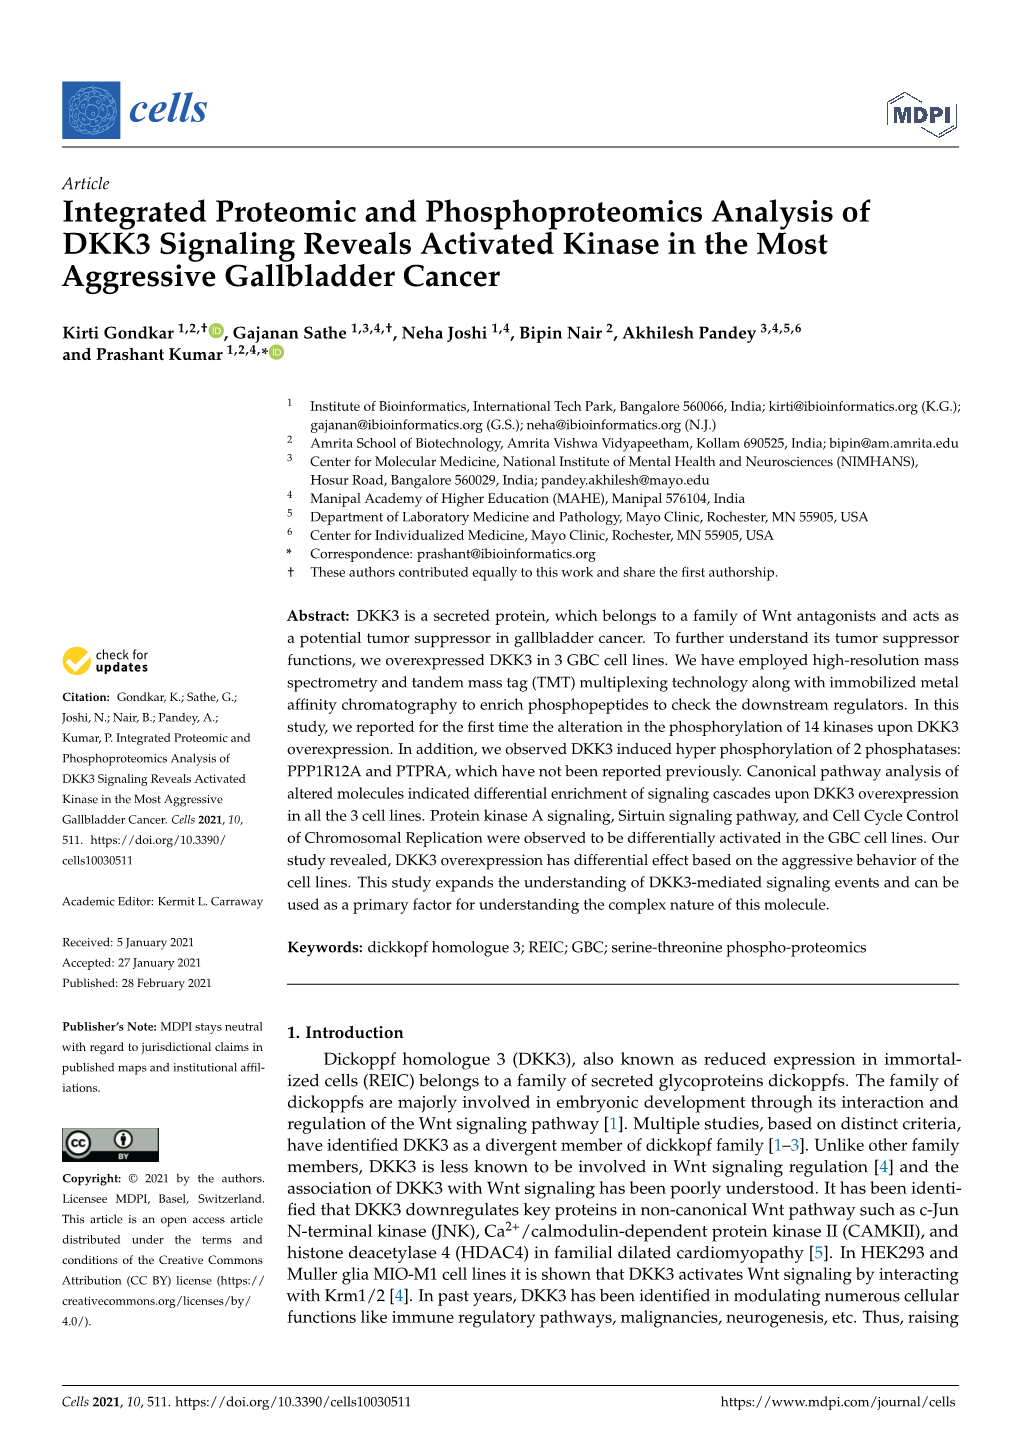 Integrated Proteomic and Phosphoproteomics Analysis of DKK3 Signaling Reveals Activated Kinase in the Most Aggressive Gallbladder Cancer